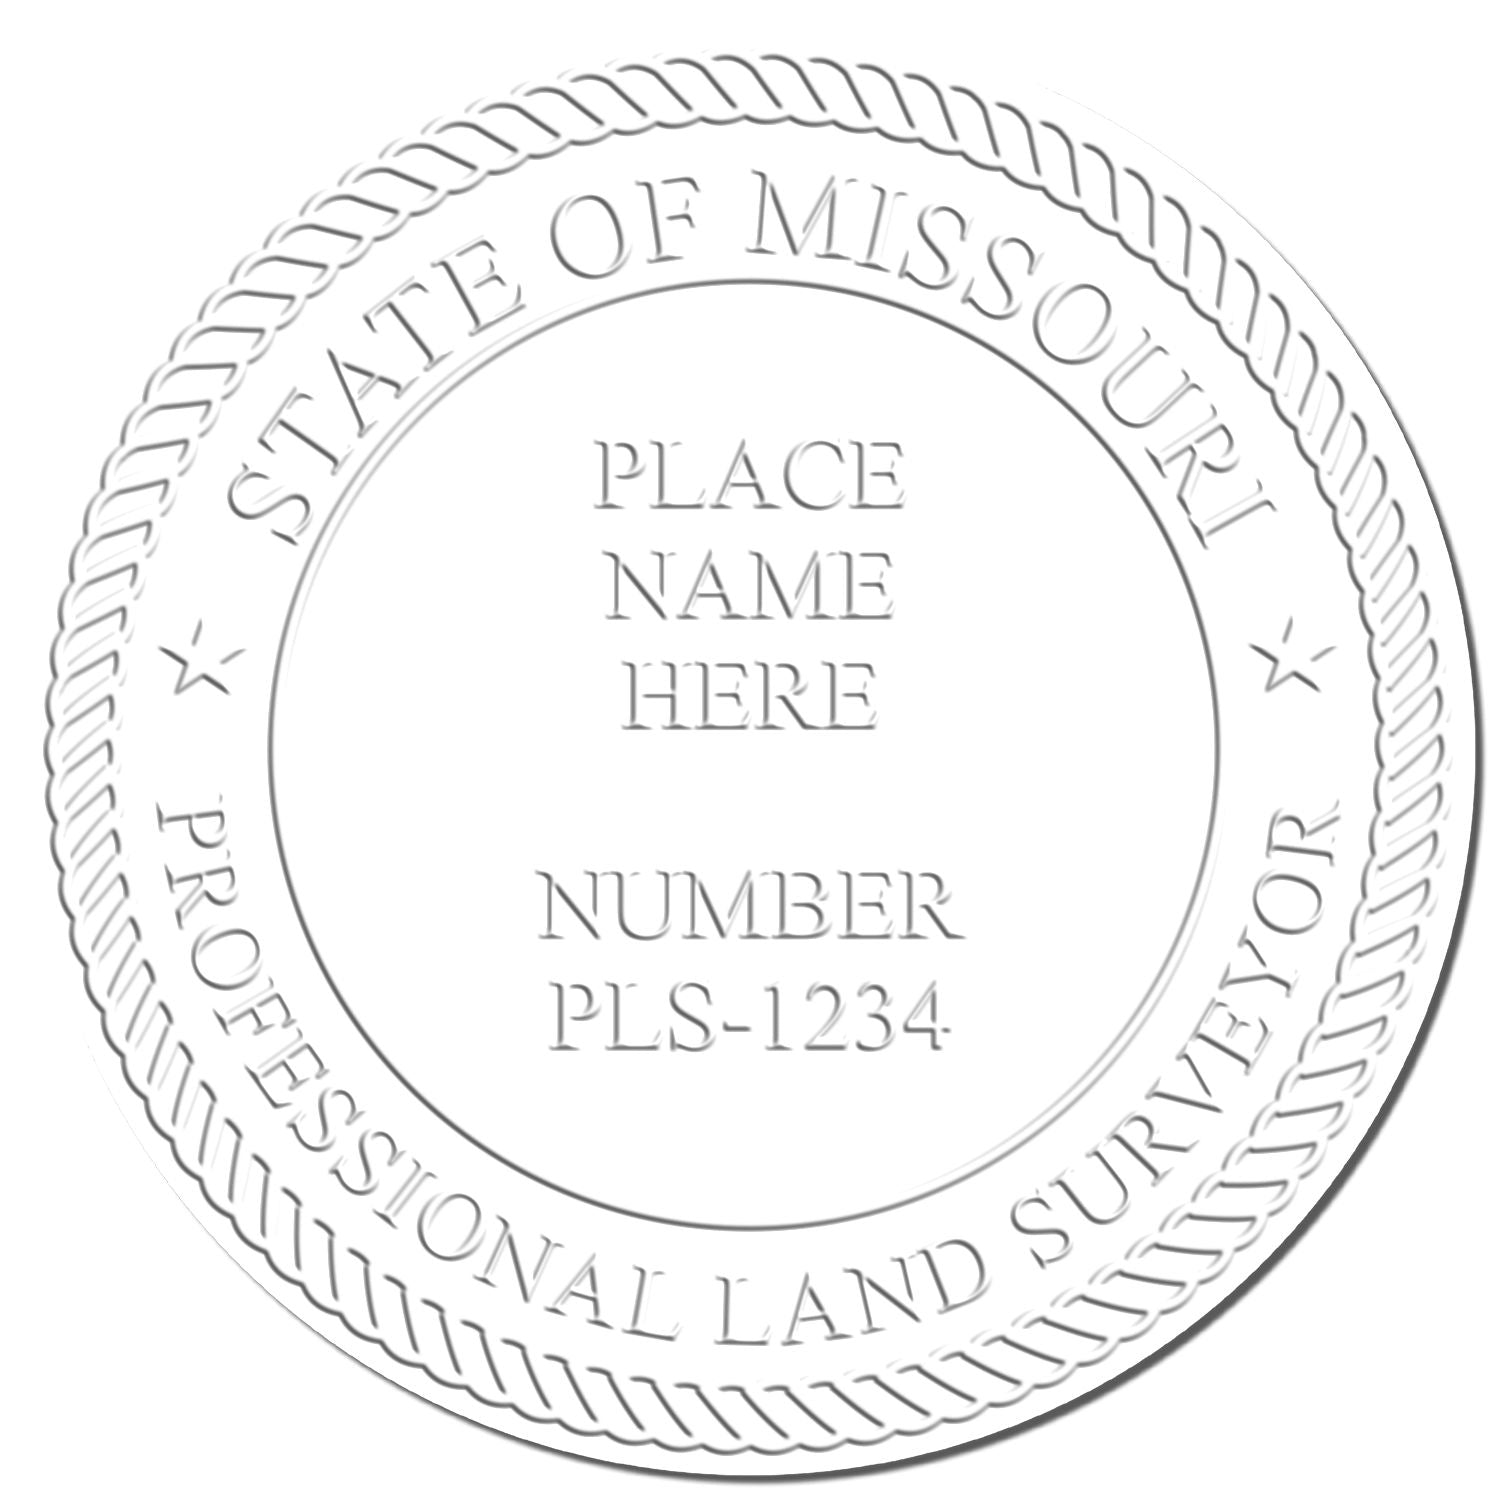 This paper is stamped with a sample imprint of the Extended Long Reach Missouri Surveyor Embosser, signifying its quality and reliability.